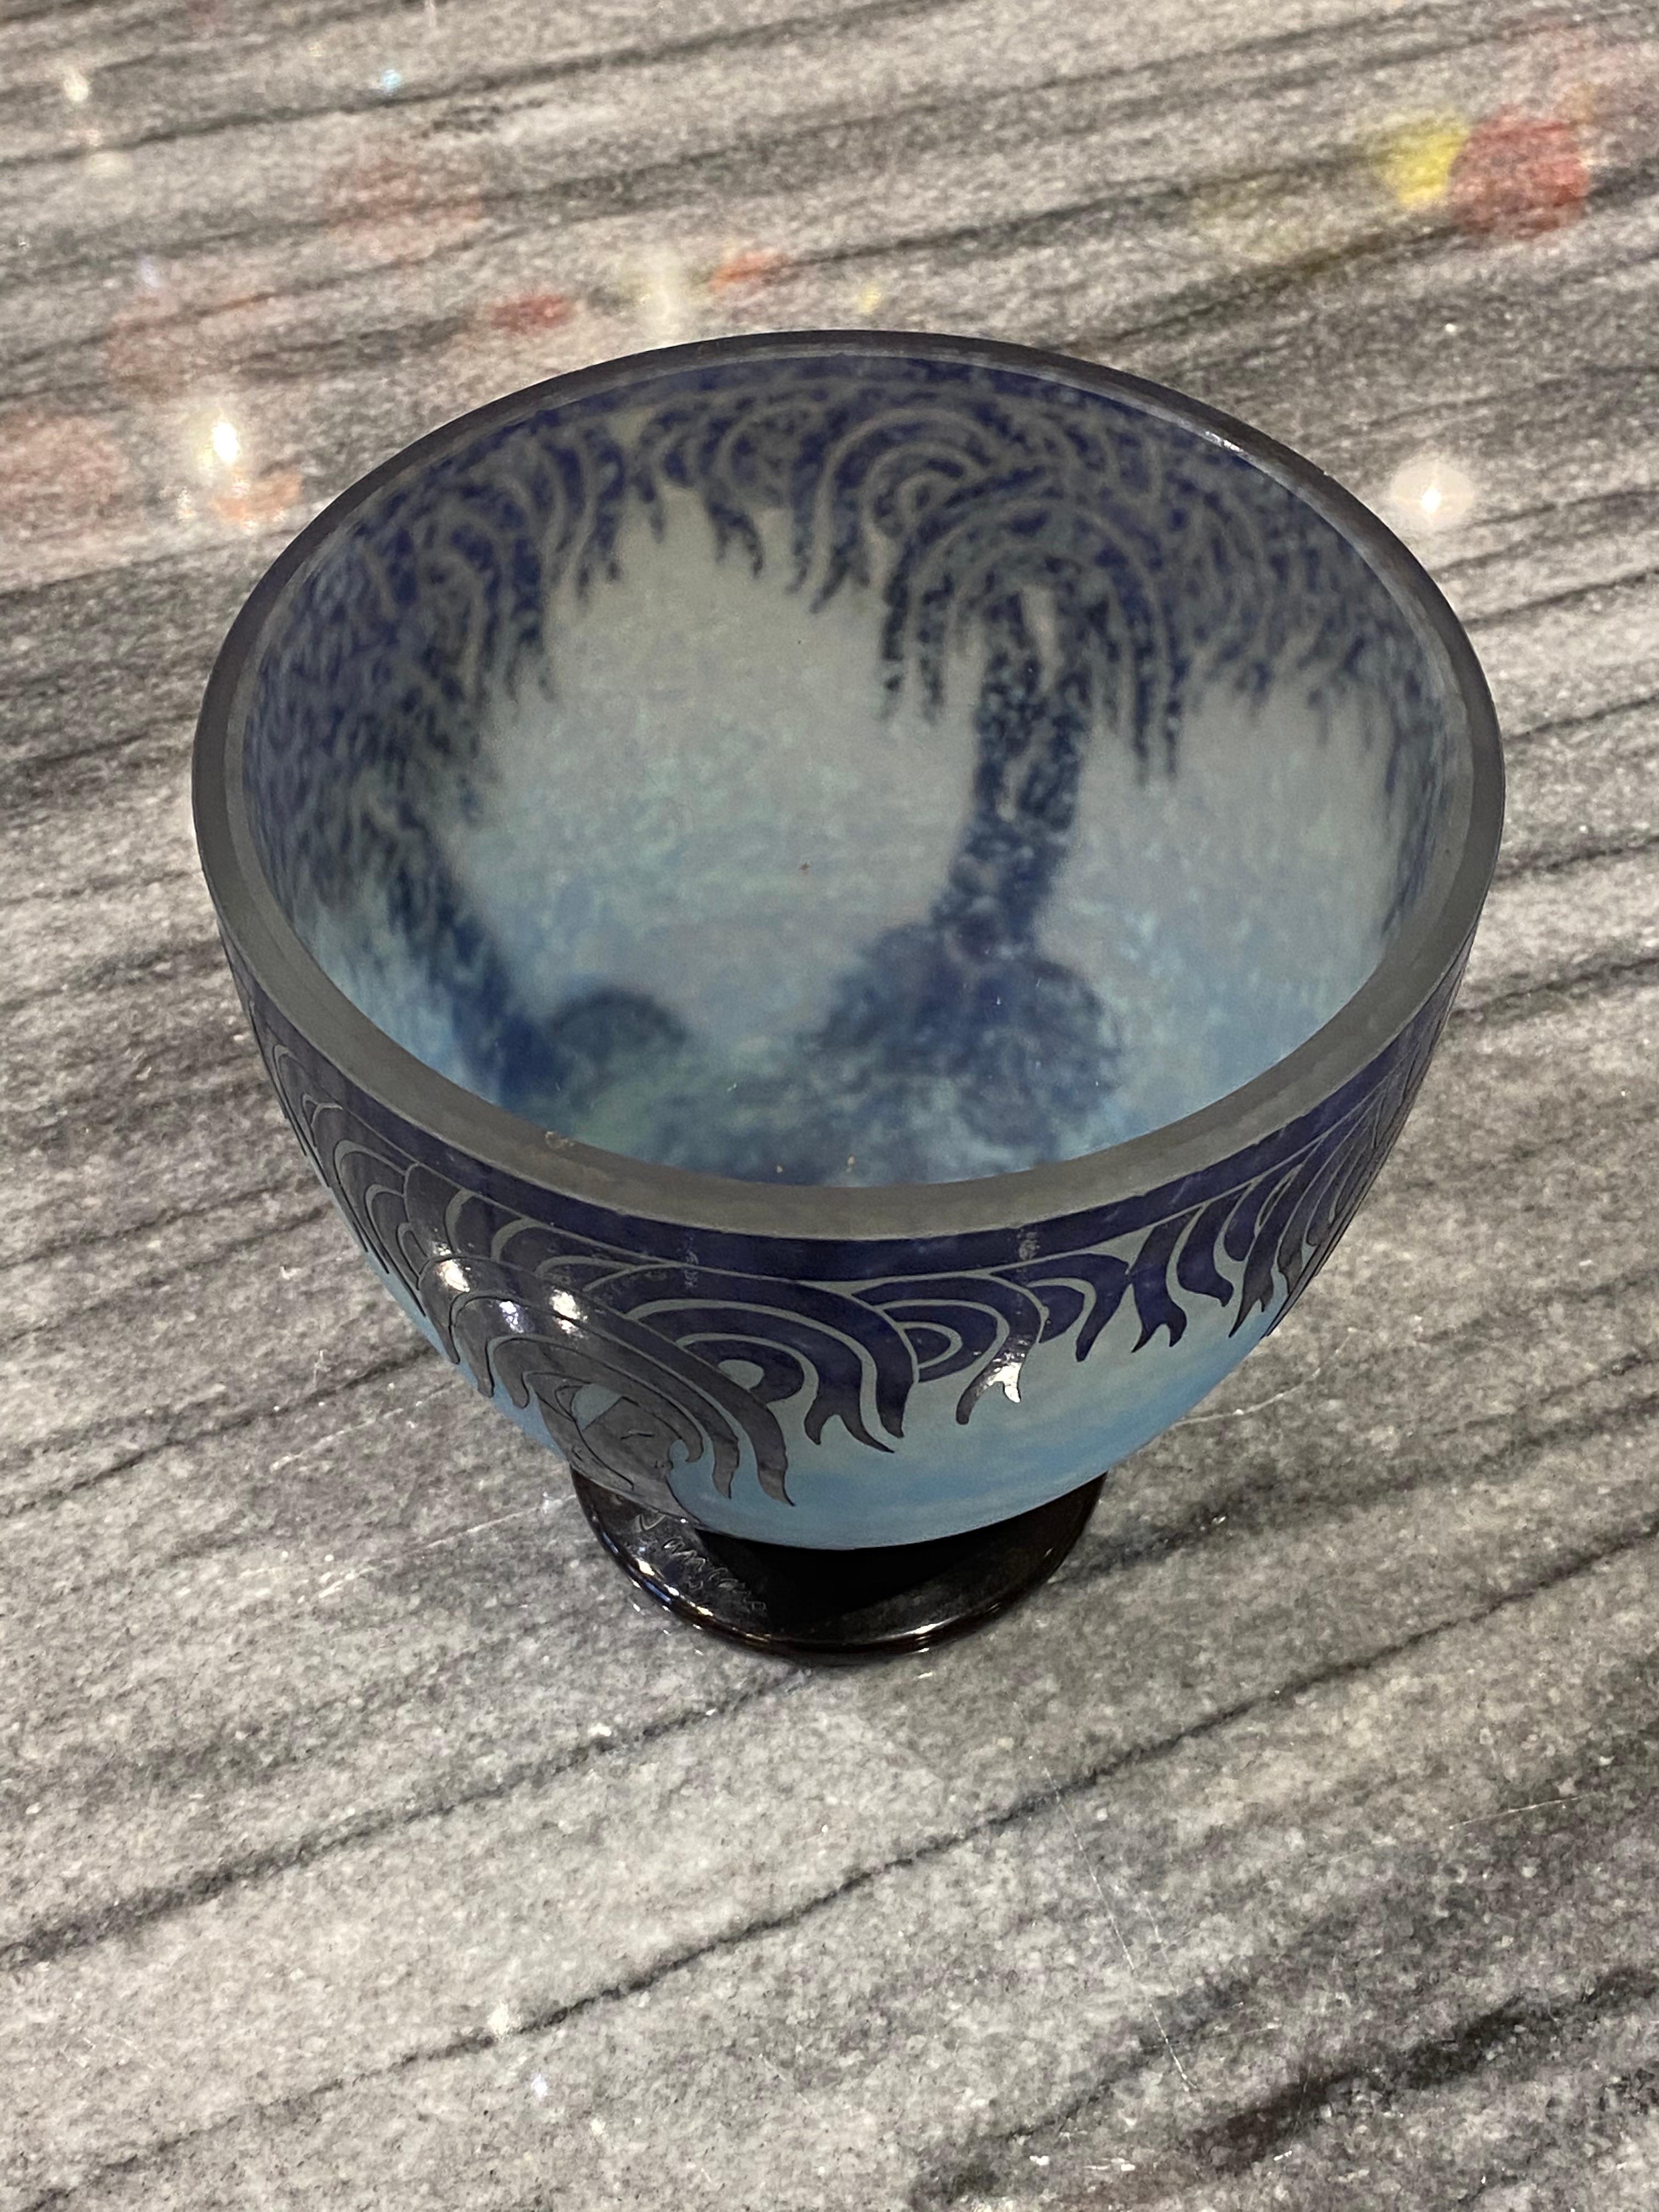 A glass vase shading into Light Blues, overlaid with Darker Bleu.  The pattern 